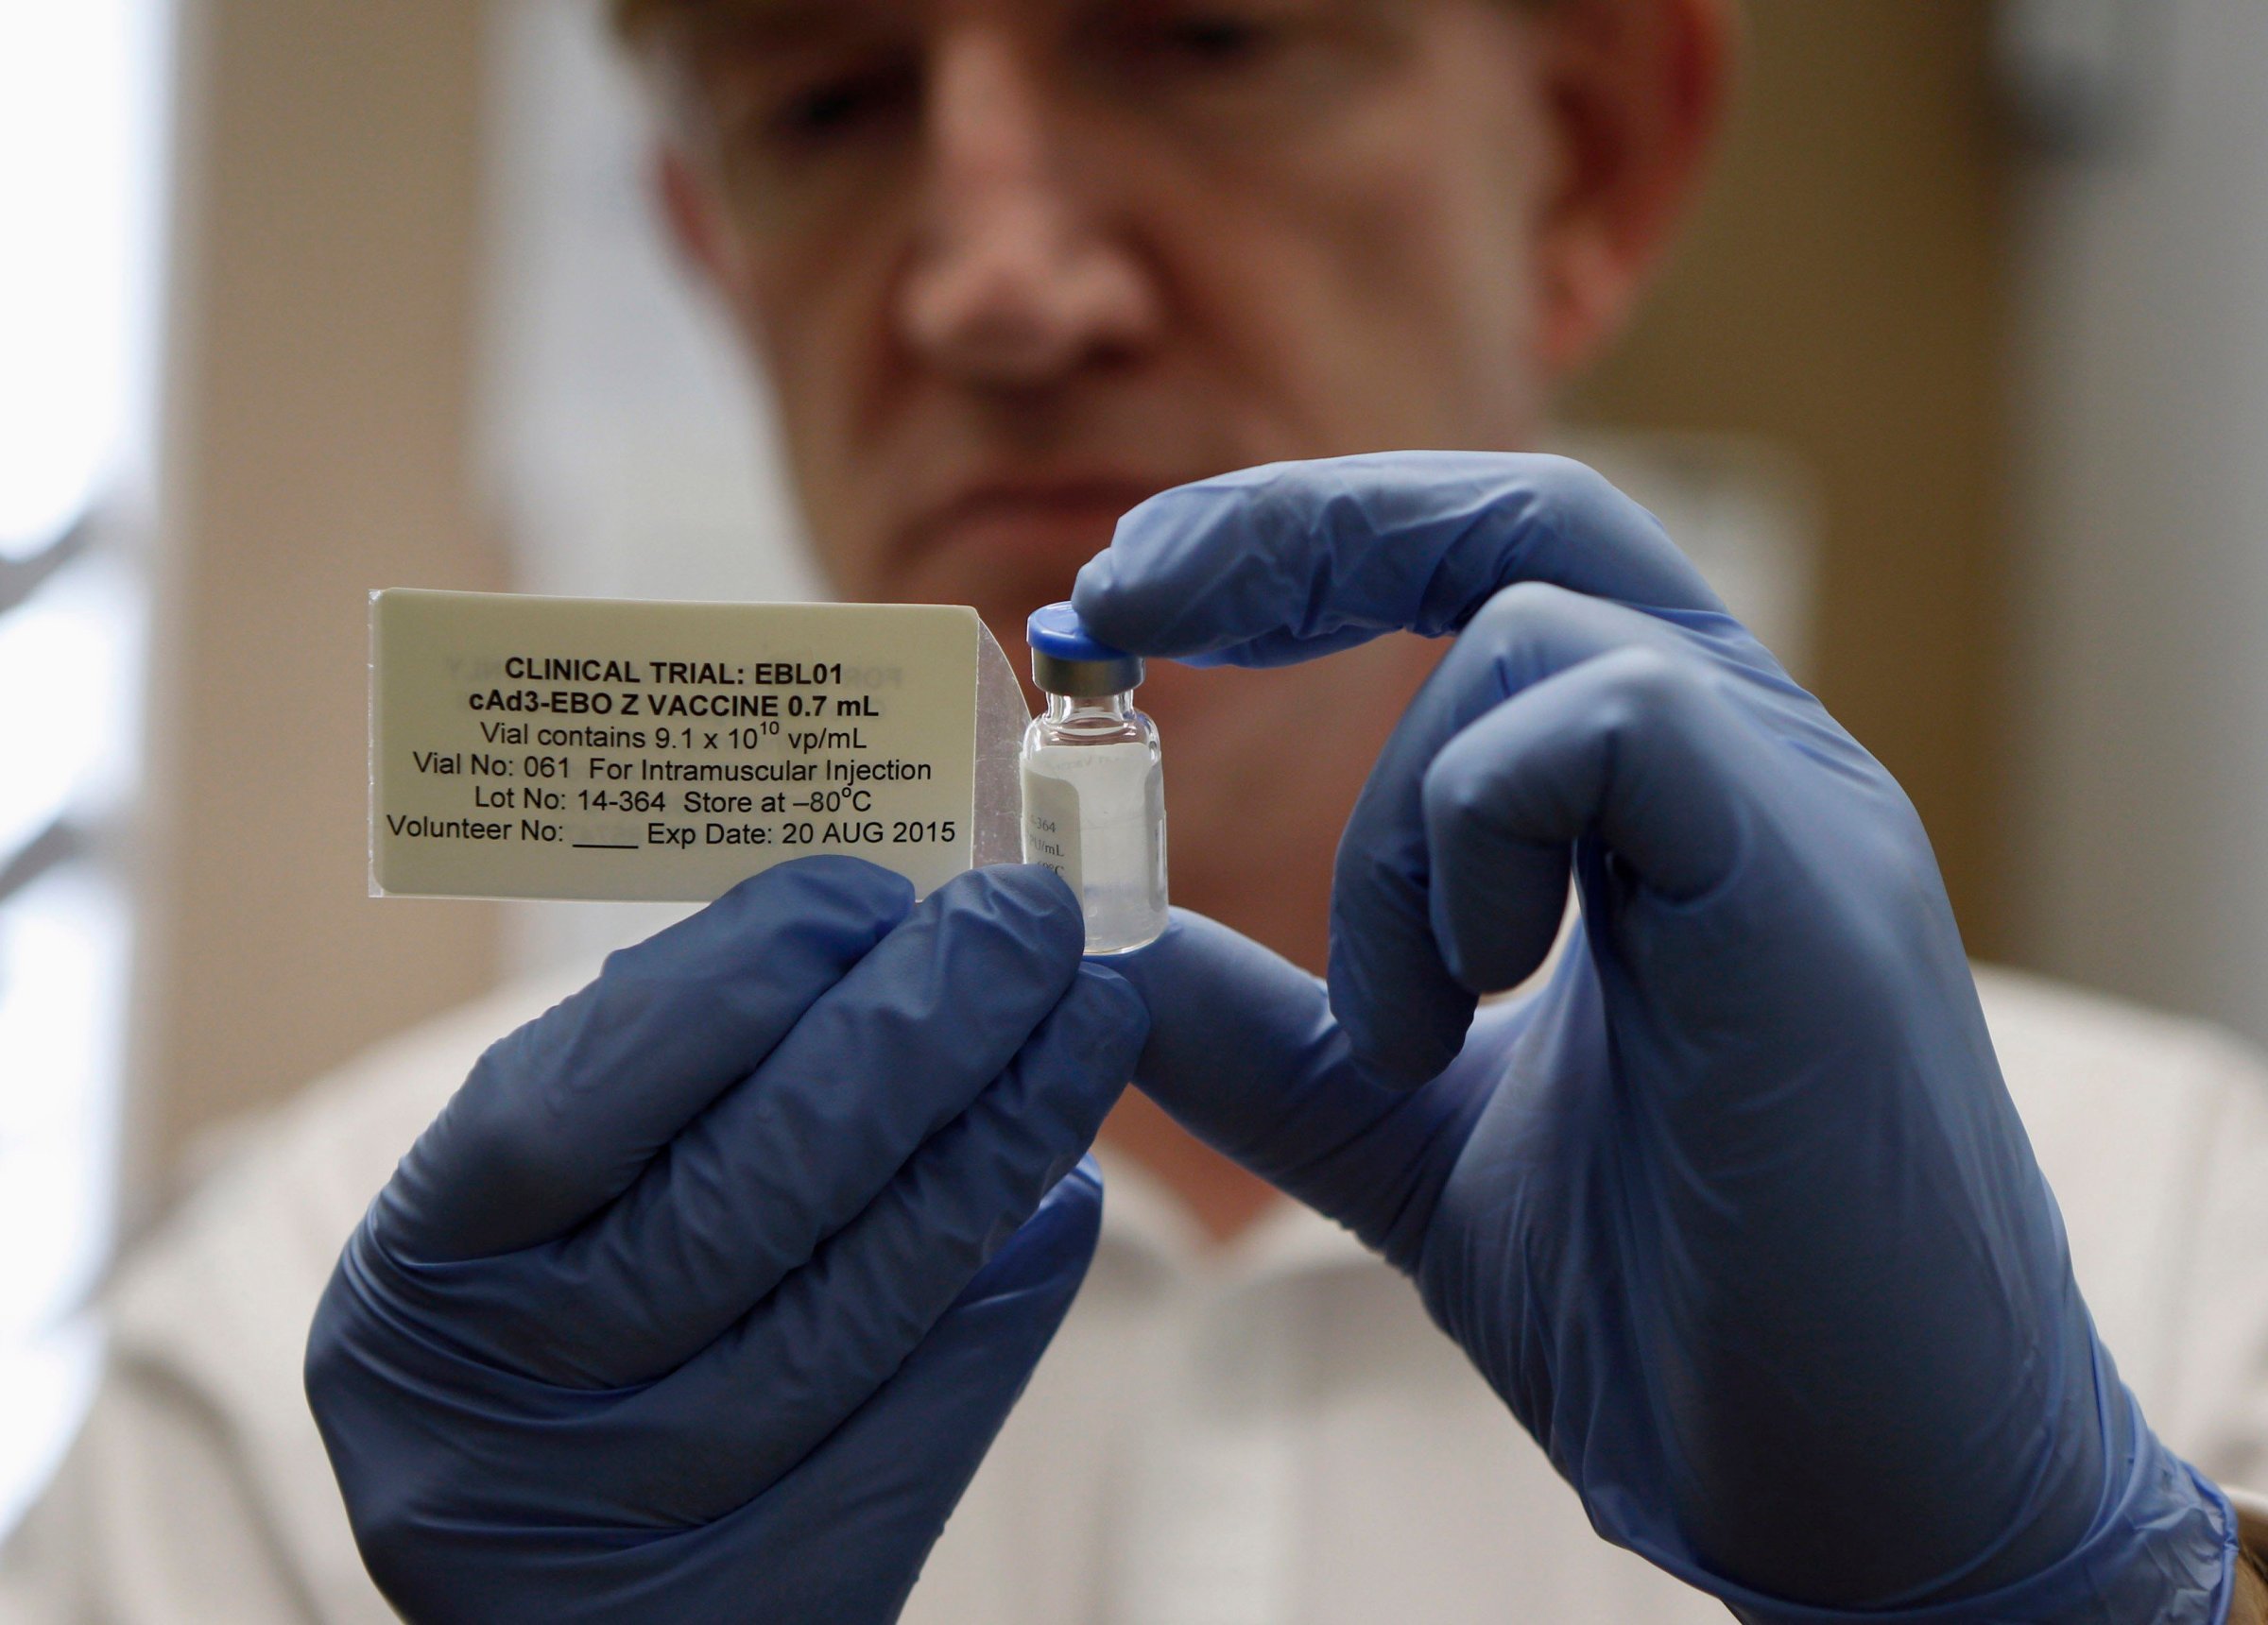 Professor Adrian Hill, Director of the Jenner Institute, and Chief Investigator of the trials, holds a phial containing the Ebola vaccine at the Oxford Vaccine Group Centre for Clinical Vaccinology and Tropical Medicine (CCVTM) in Oxford, southern England on Sept. 17, 2014.